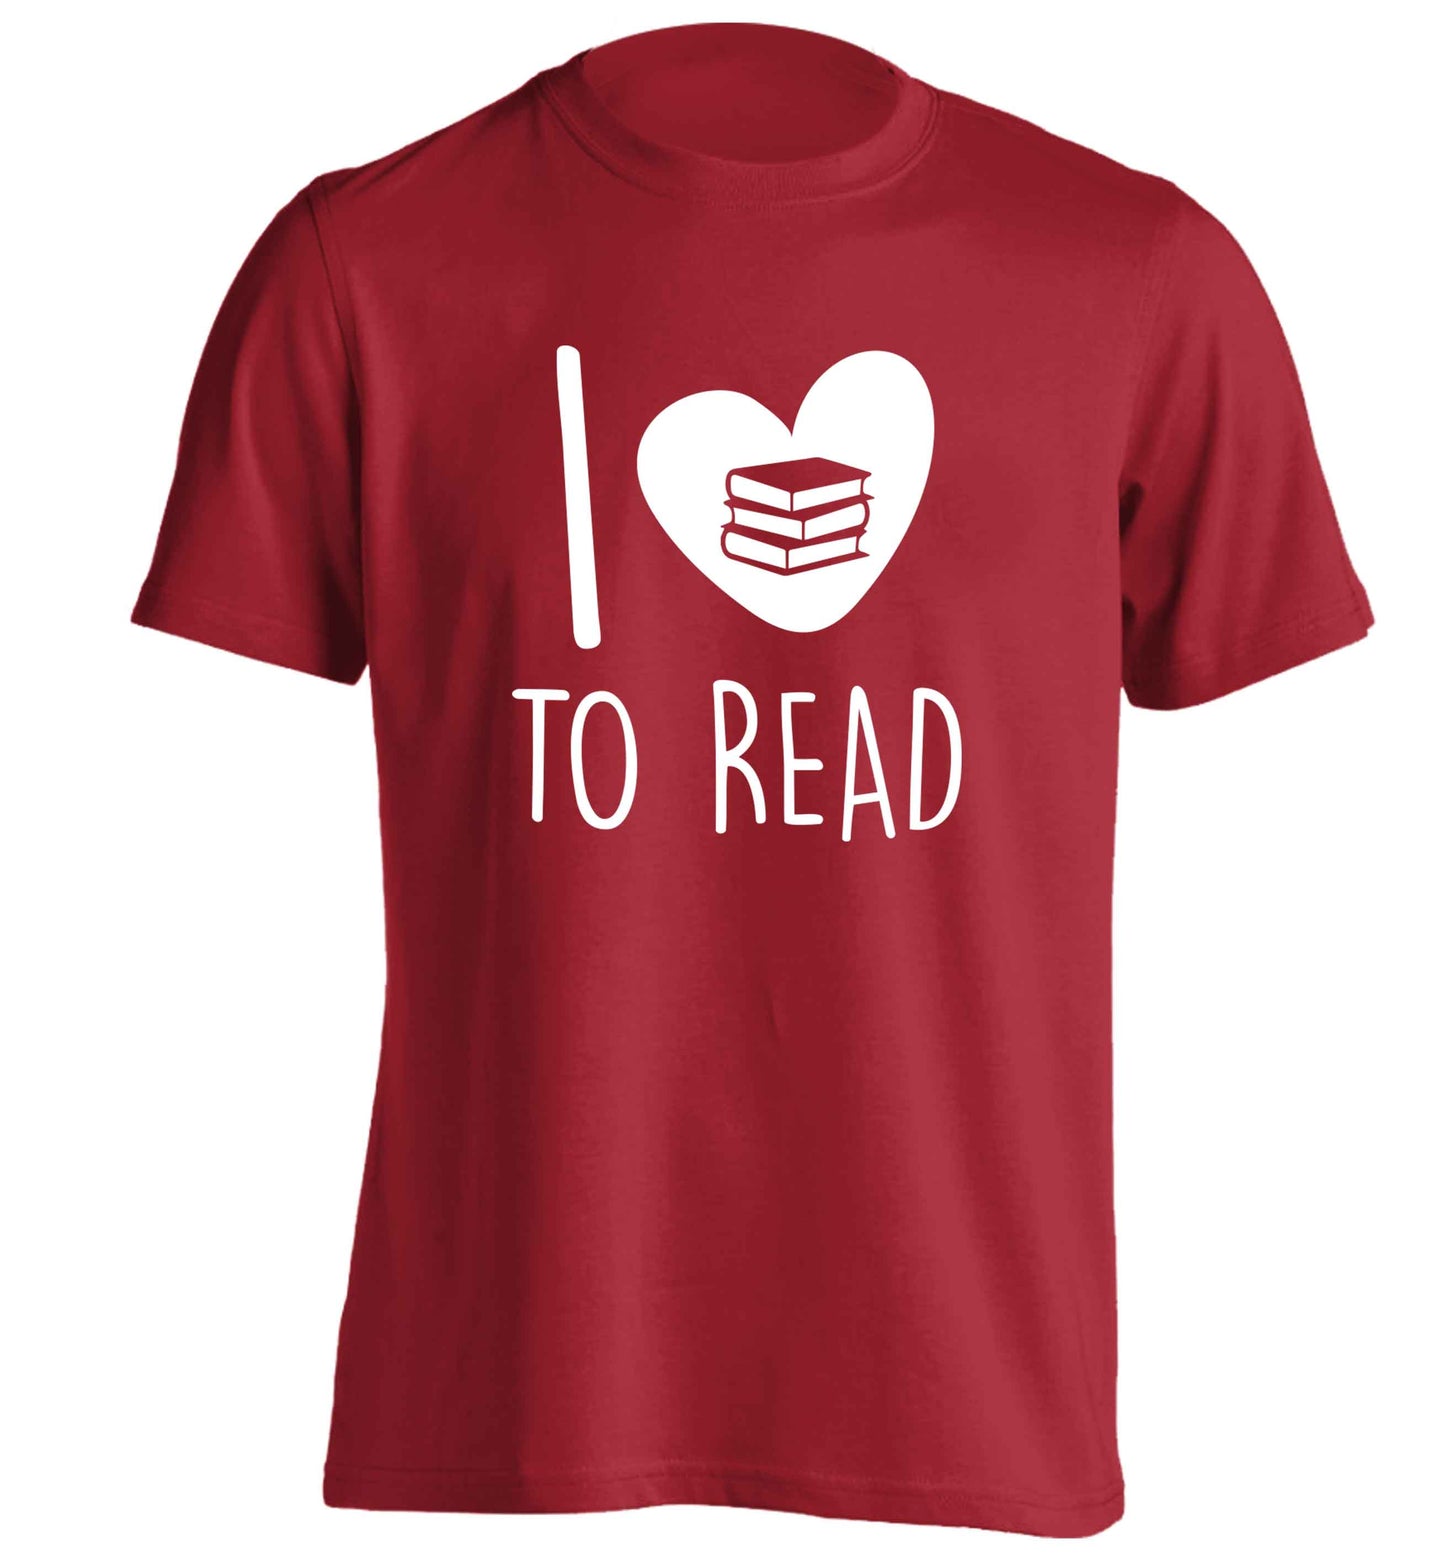 I love to read adults unisex red Tshirt 2XL